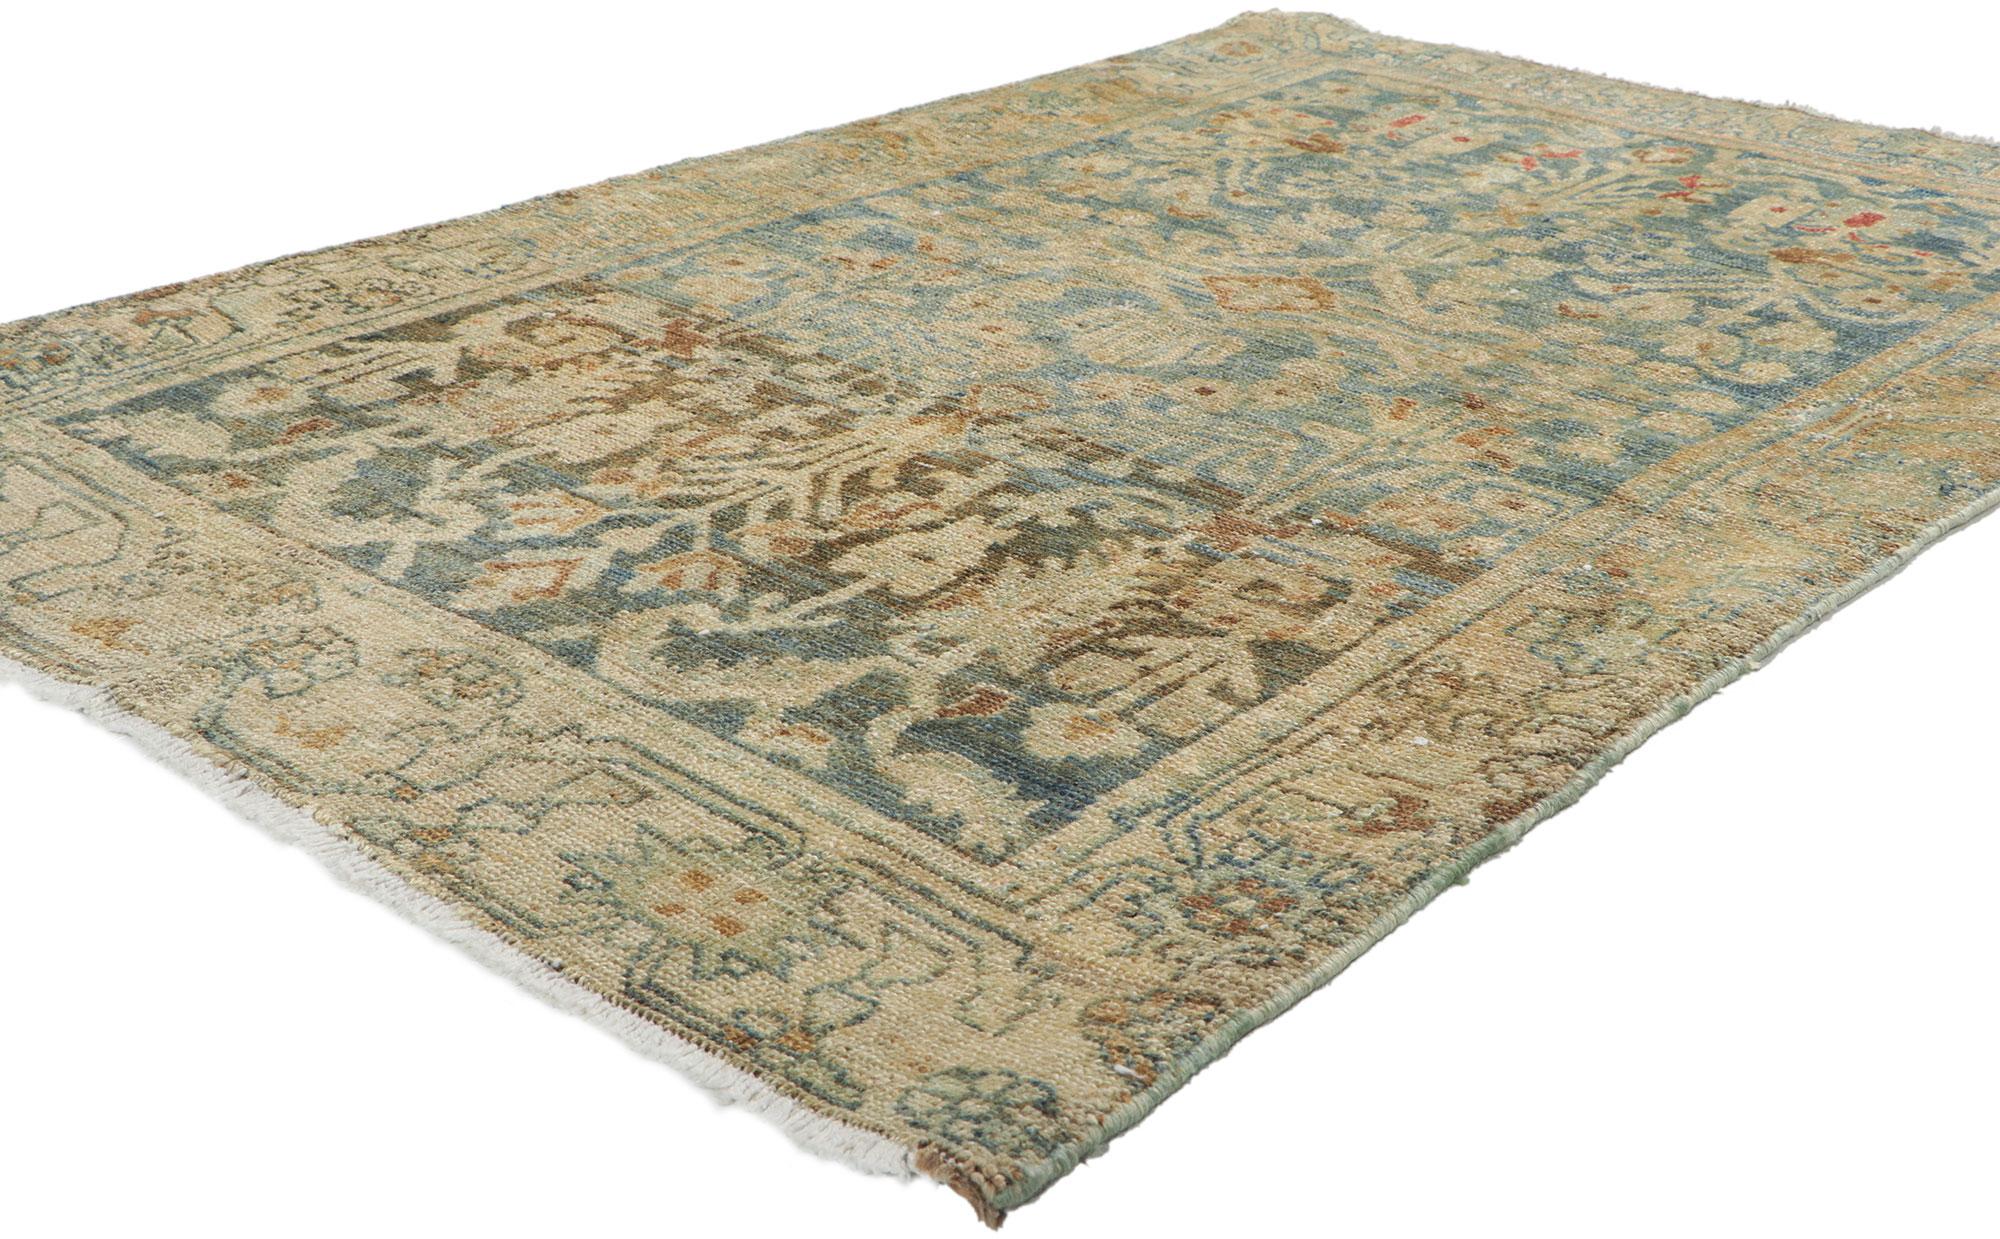 61133 Antique Persian Malayer Rug, 03'07 x 05'07.  Emanating sophistication and rustic sensibility combined with nostalgic charm, this antique Malayer rug creates an inimitable warmth and calming ambiance. Perfect for a small space, reading nook,